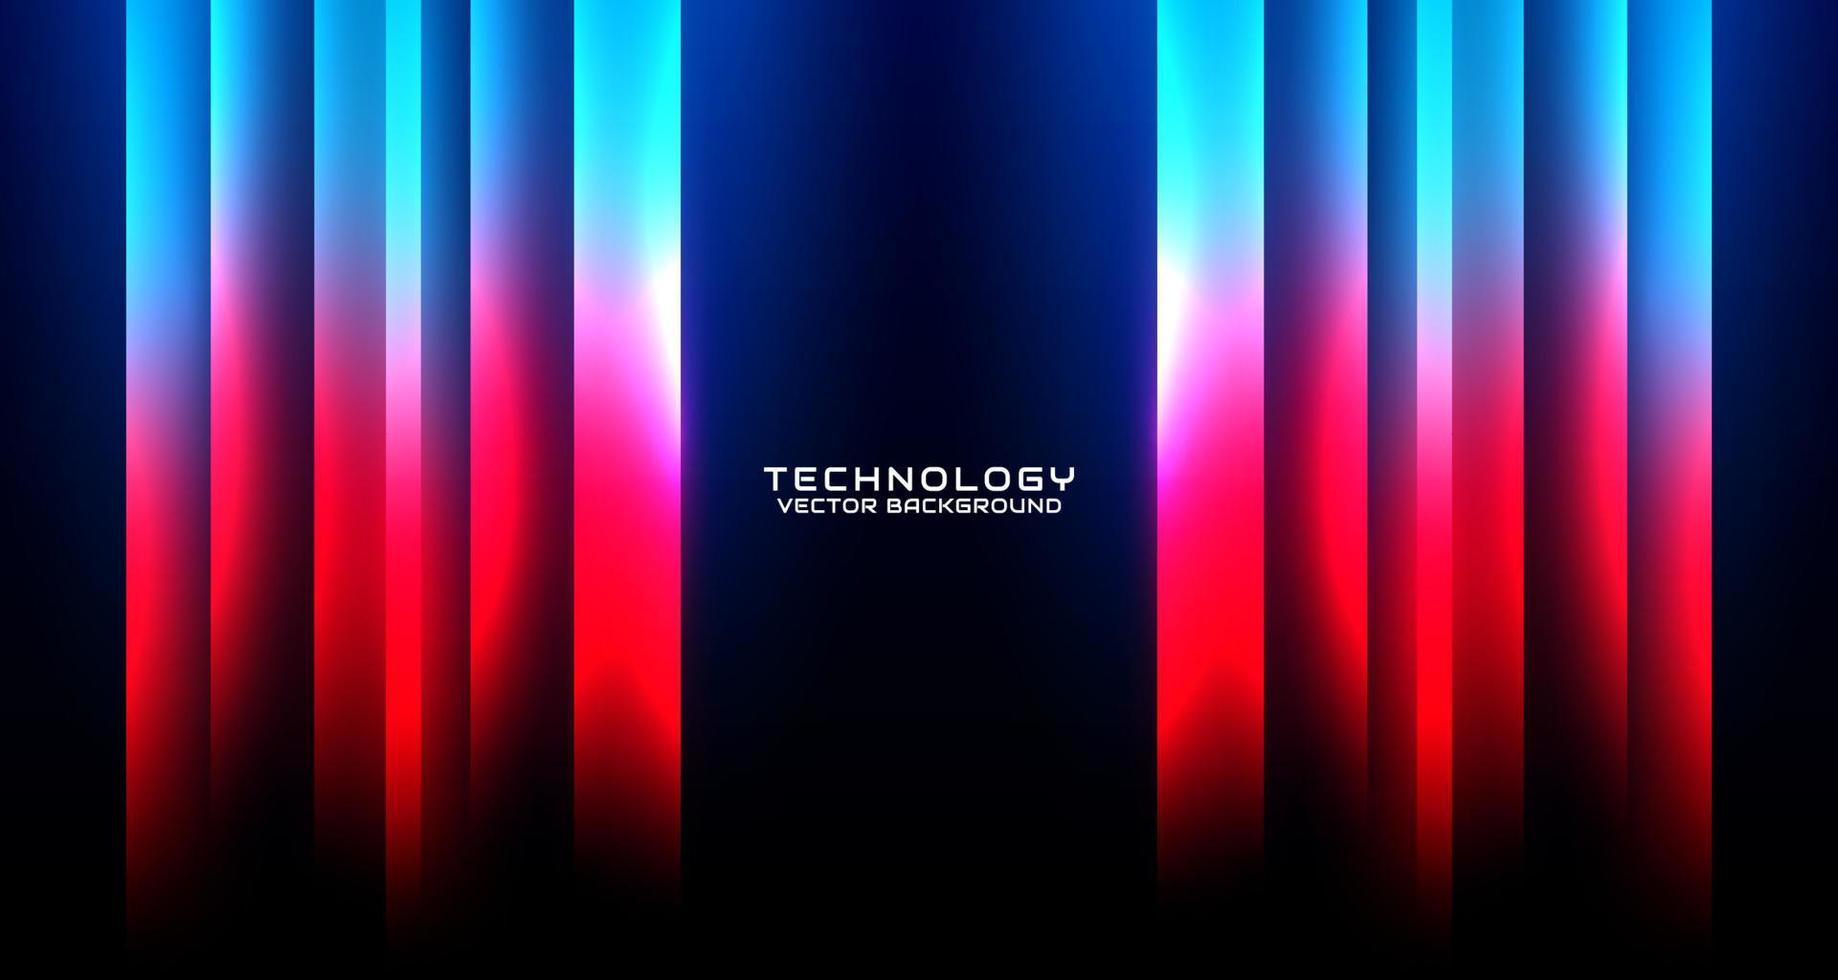 3D red blue techno abstract background overlap layer on dark space with glowing effect decoration. Style concept cut out. Graphic design element for banner flyer, card, brochure cover, or landing page vector